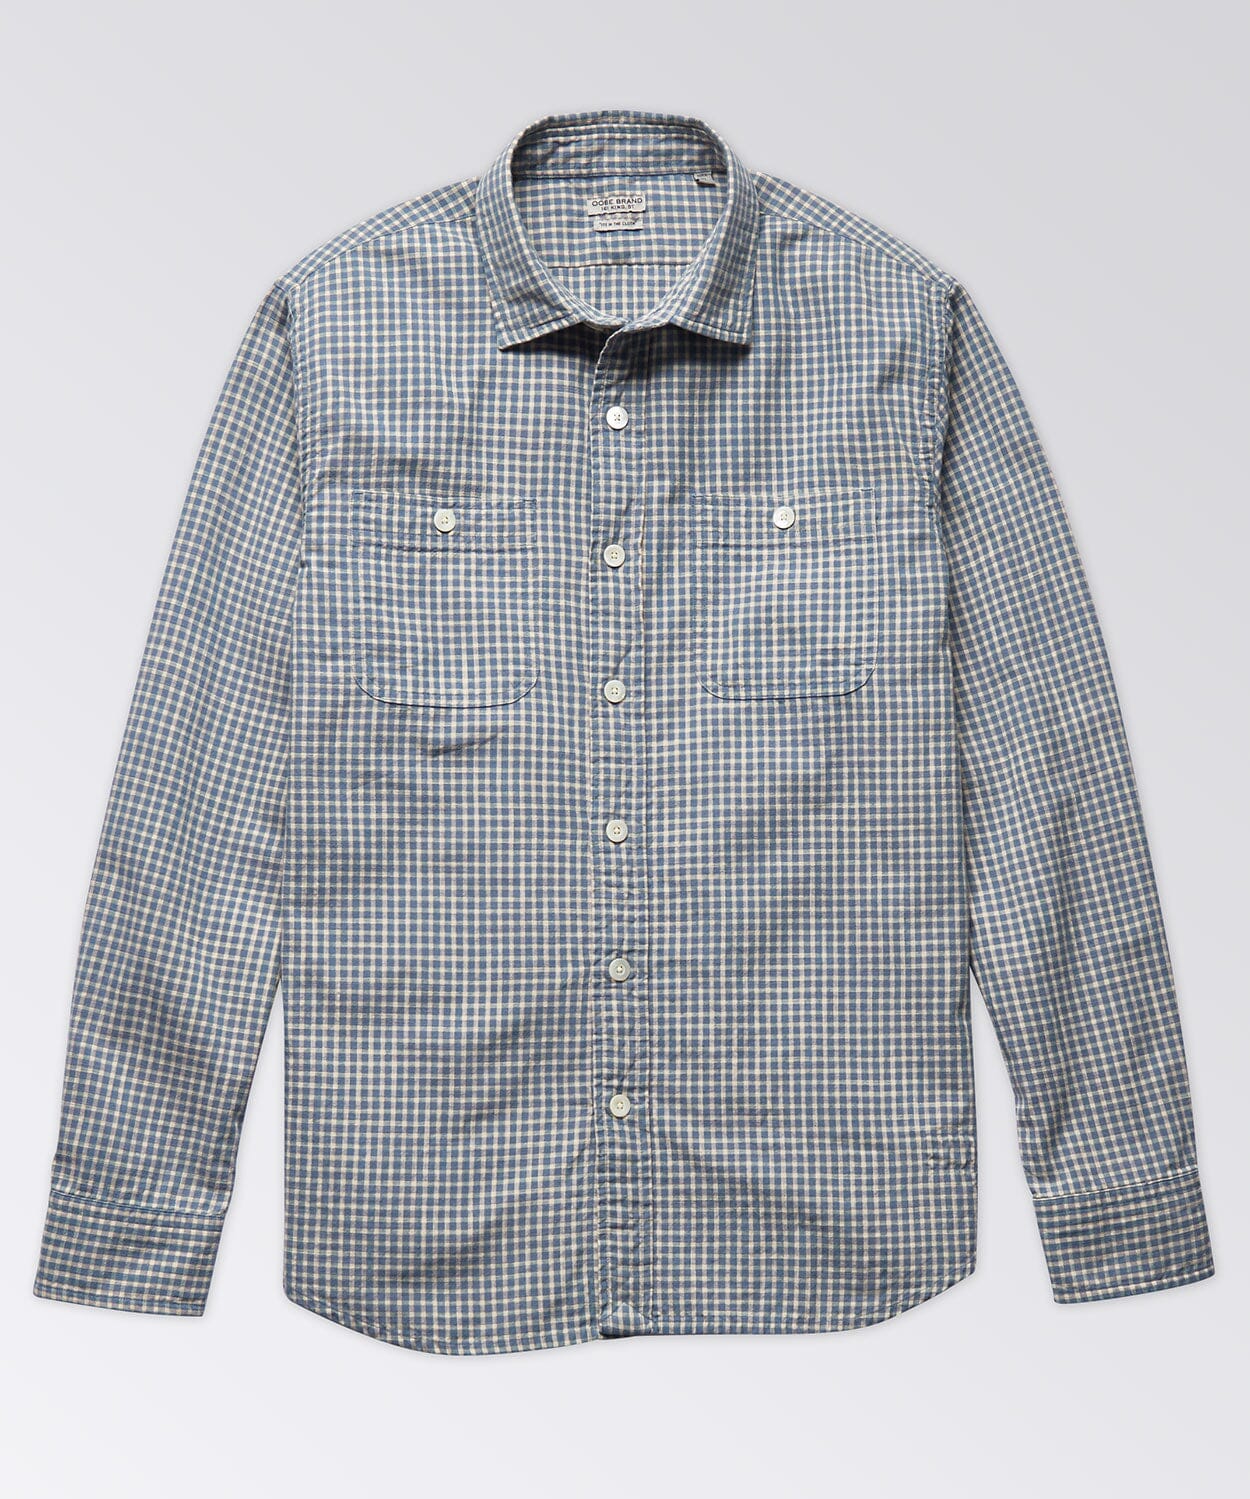 Marlan Workshirt Button Downs OOBE BRAND Blue Check S 